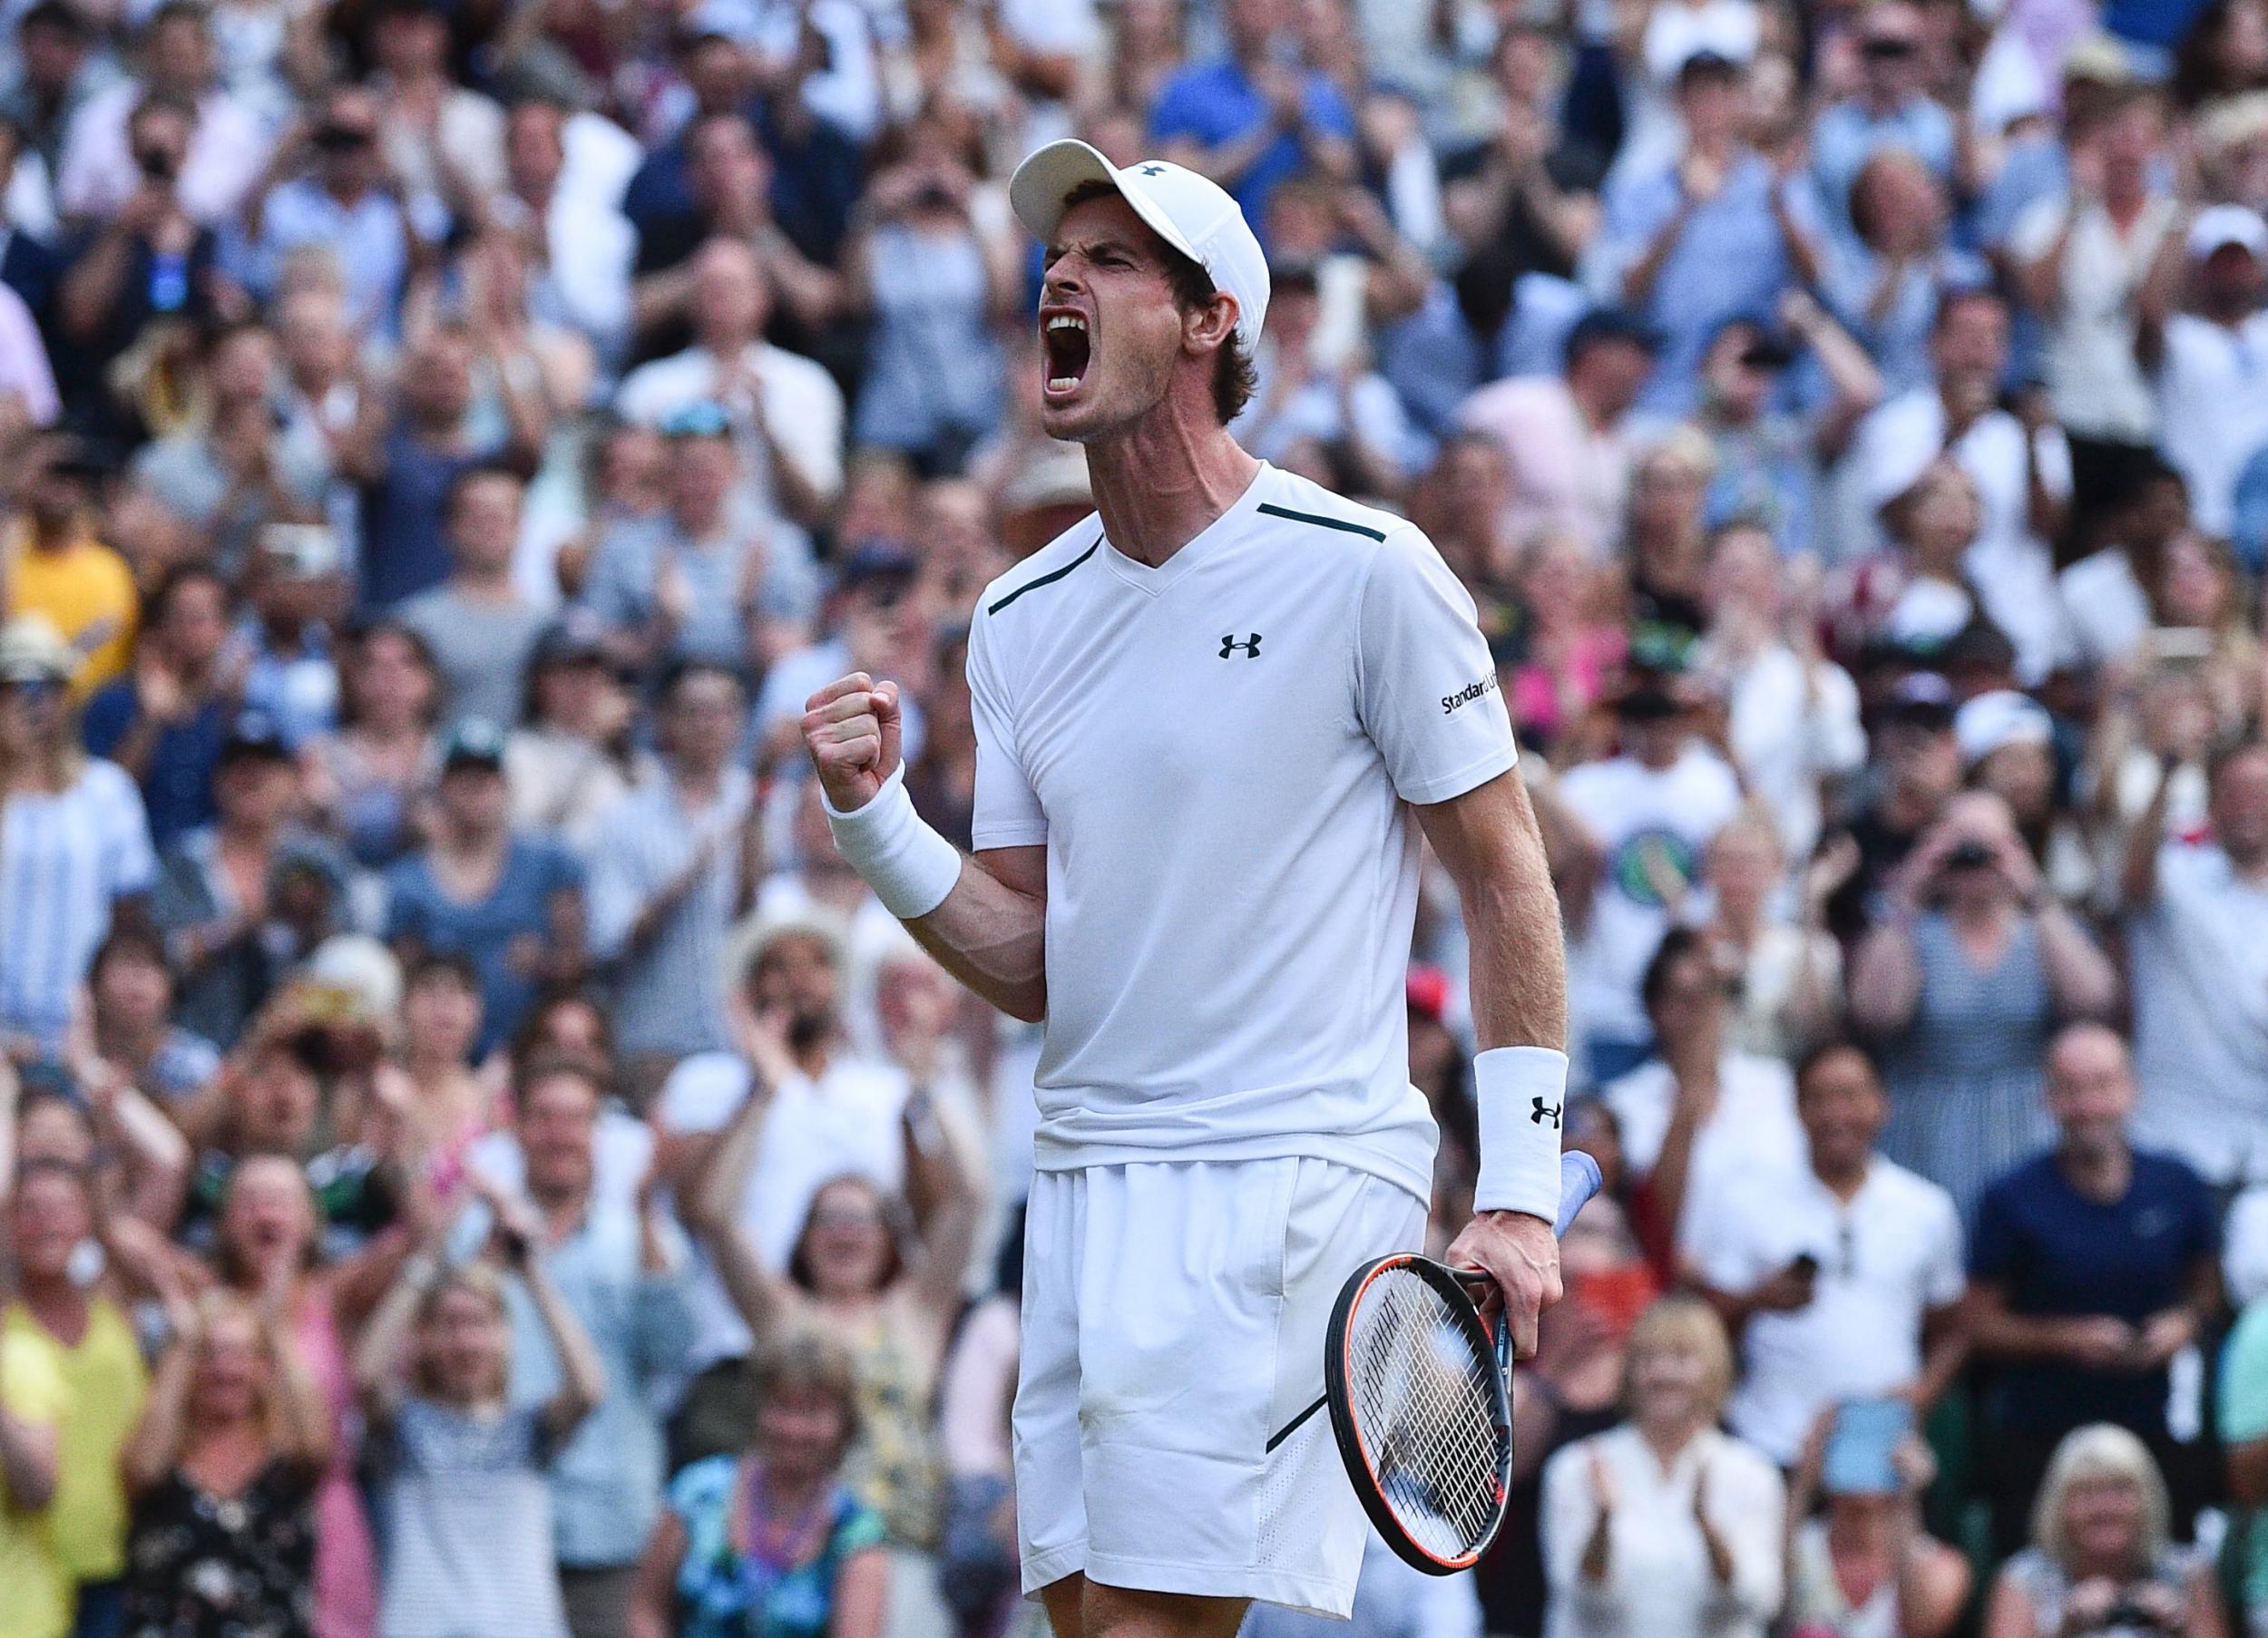 Murray returns to action on Manic Monday